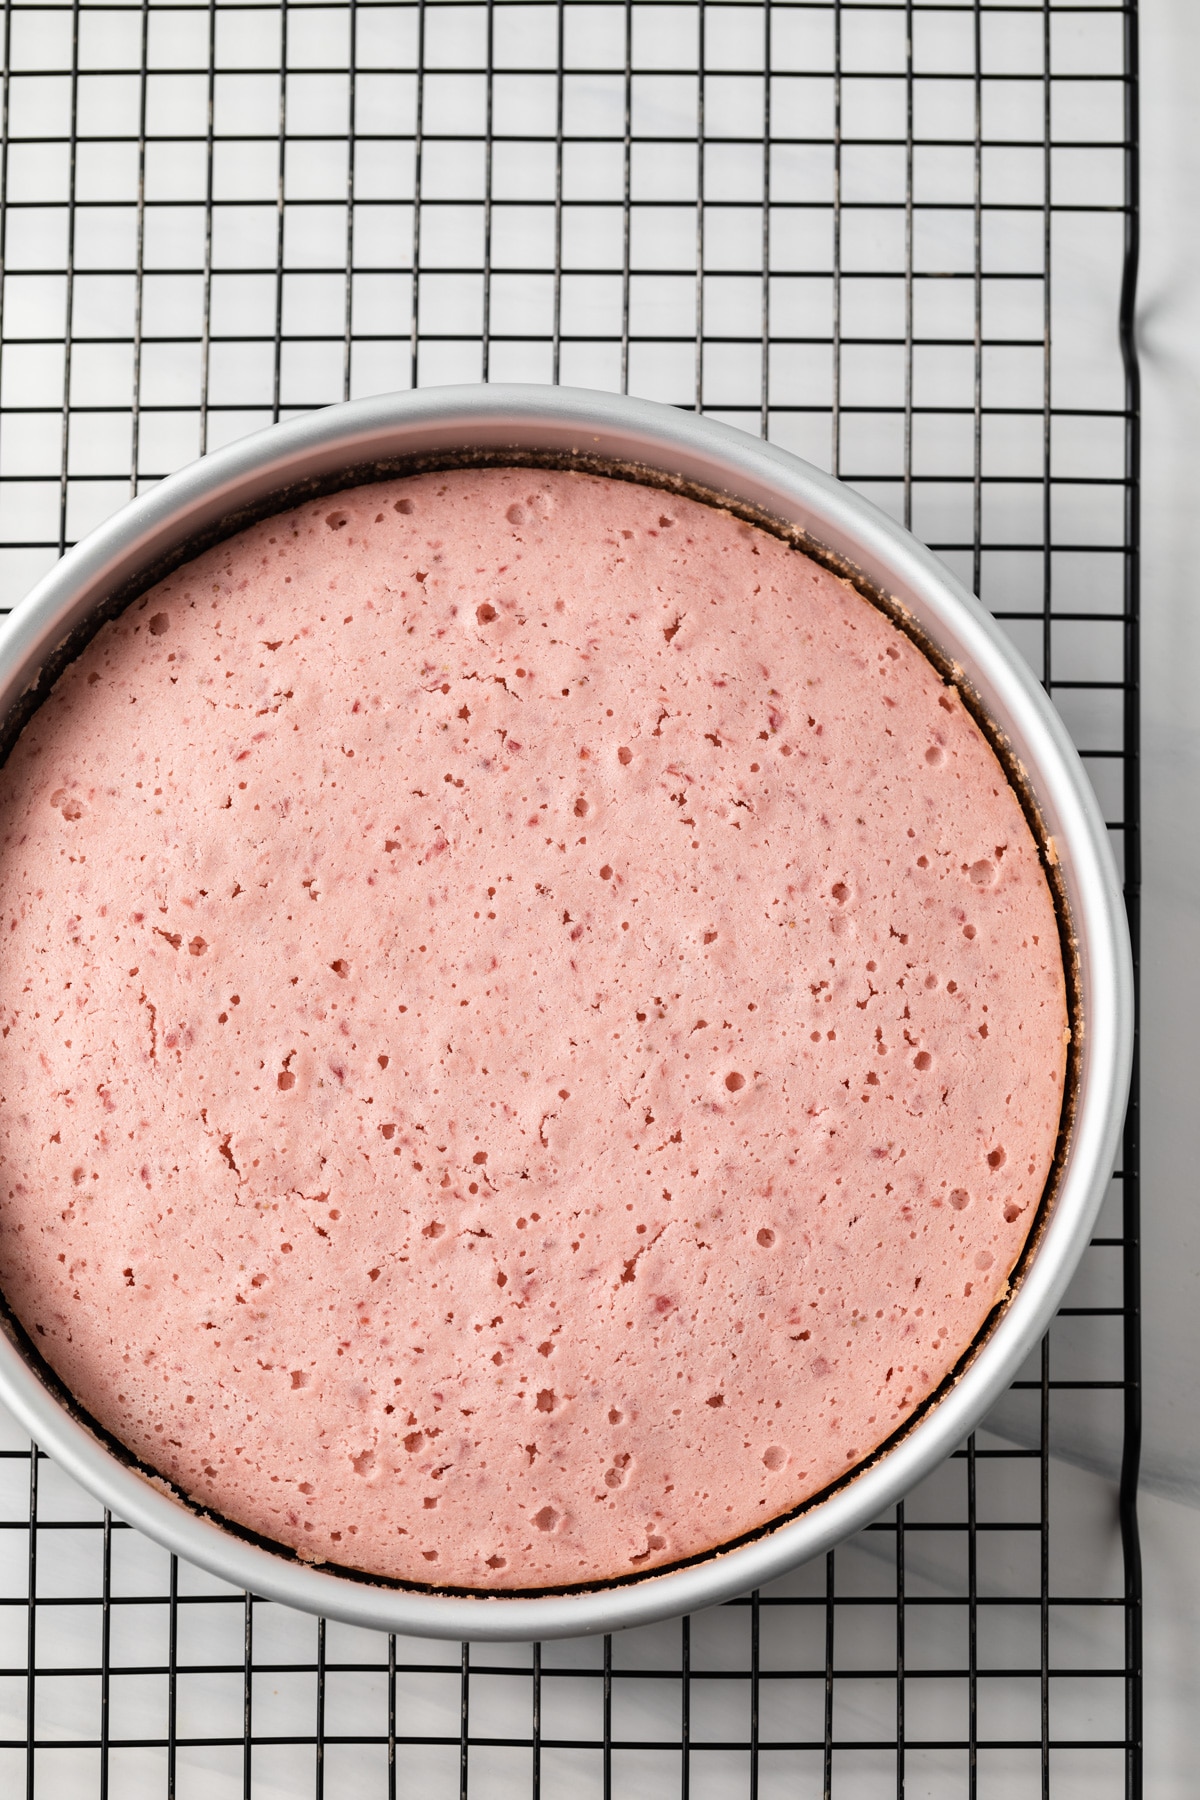 Baked strawberry cake in a round cake pan.